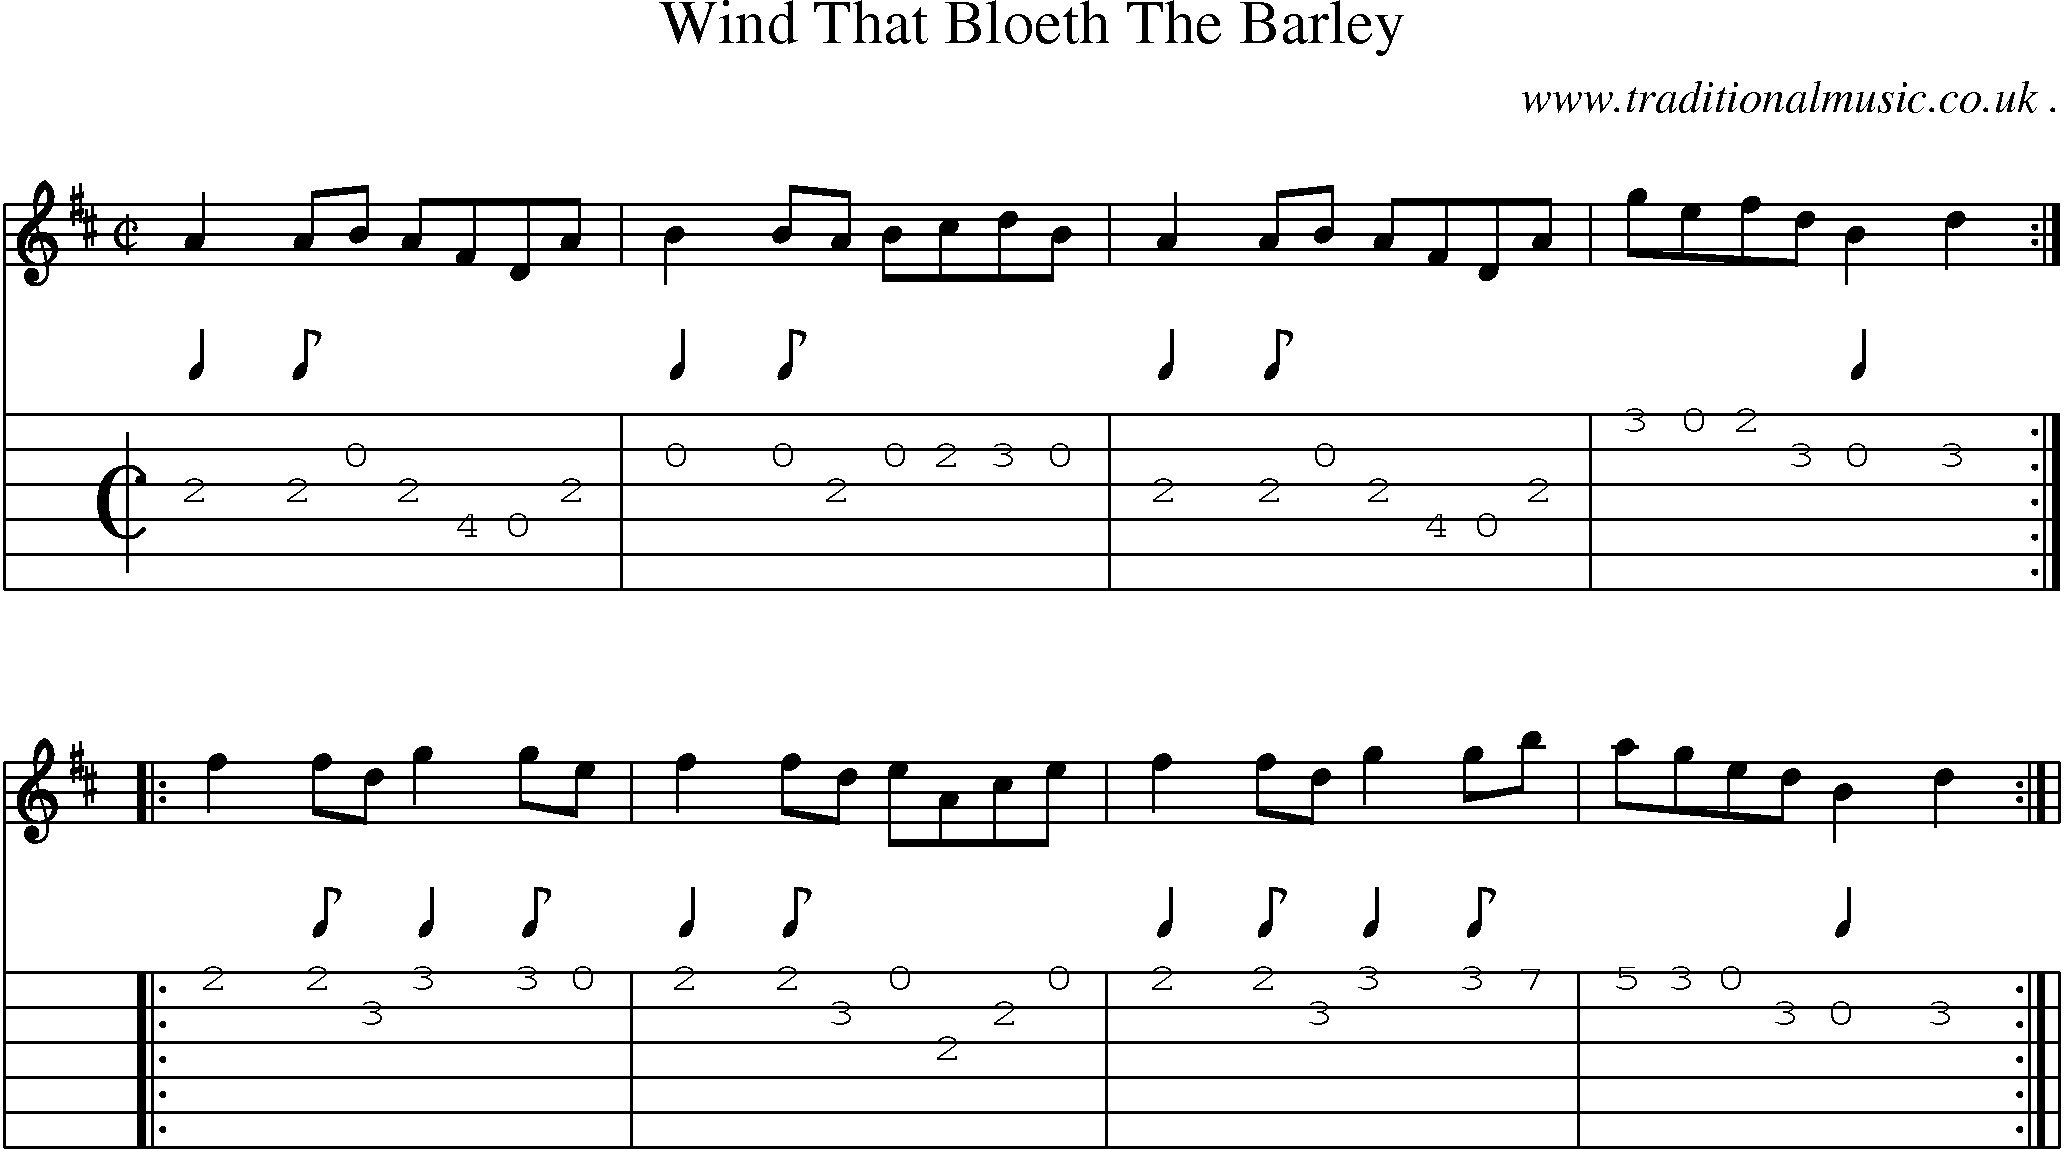 Sheet-Music and Guitar Tabs for Wind That Bloeth The Barley